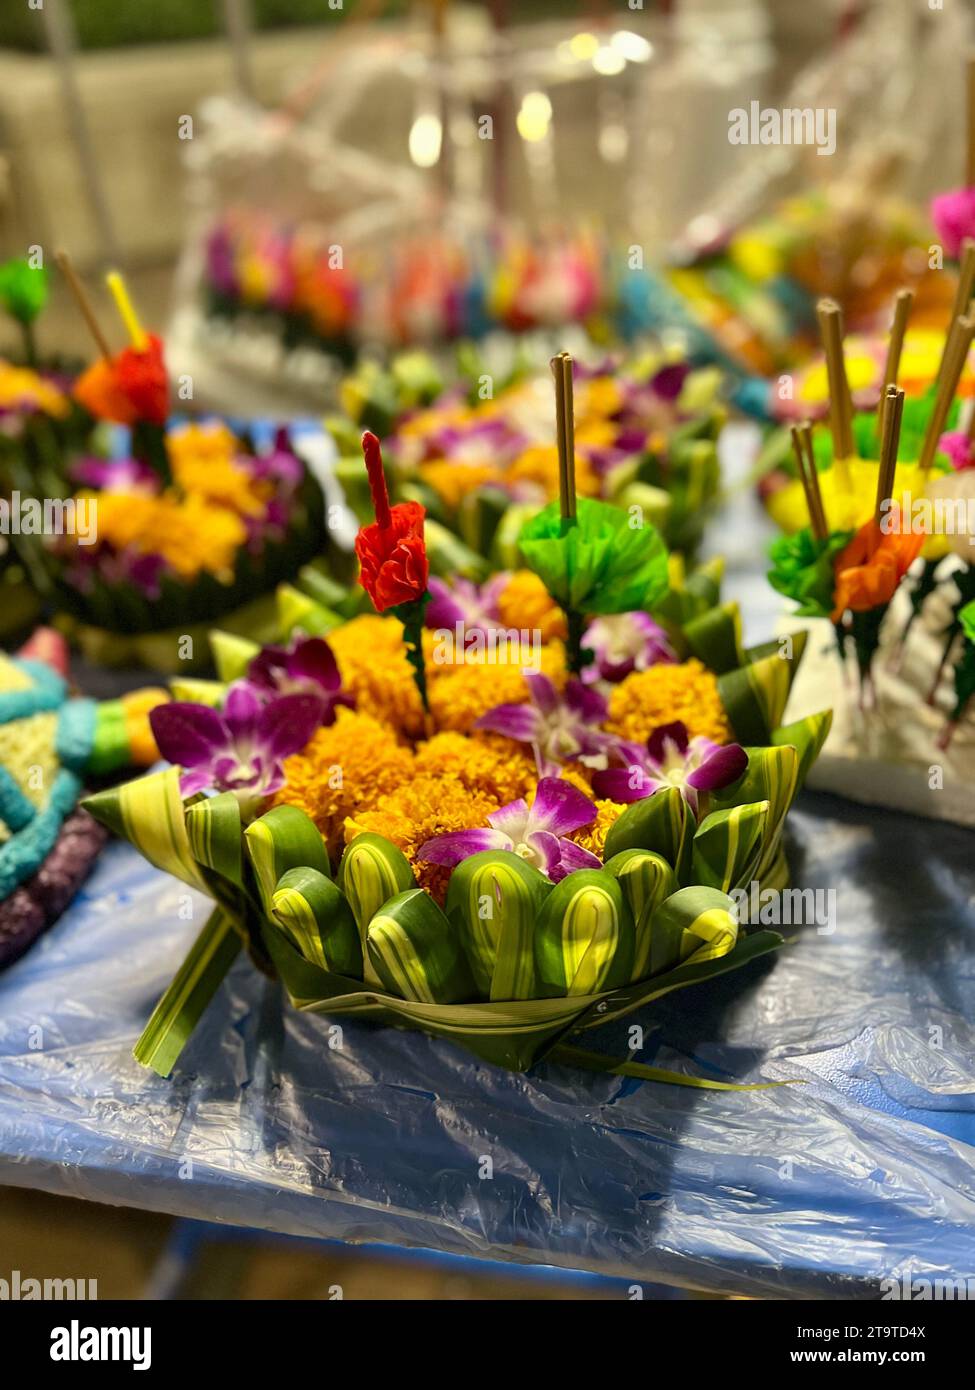 Bangkok, Thailand. 27th Nov, 2023. Krathongs lie on a stall. The small rafts are made of banana trees or expanded polystyrene and are decorated with flowers, incense sticks and candles. Thailand always celebrates the Loi Krathong festival of lights on the day of the full moon in the twelfth month of the traditional calendar. The small rafts are lowered into the water in rivers or lakes to pay homage to the Hindu water goddess Mae Phra Khongkha. Credit: Carola Frentzen/dpa/Alamy Live News Stock Photo